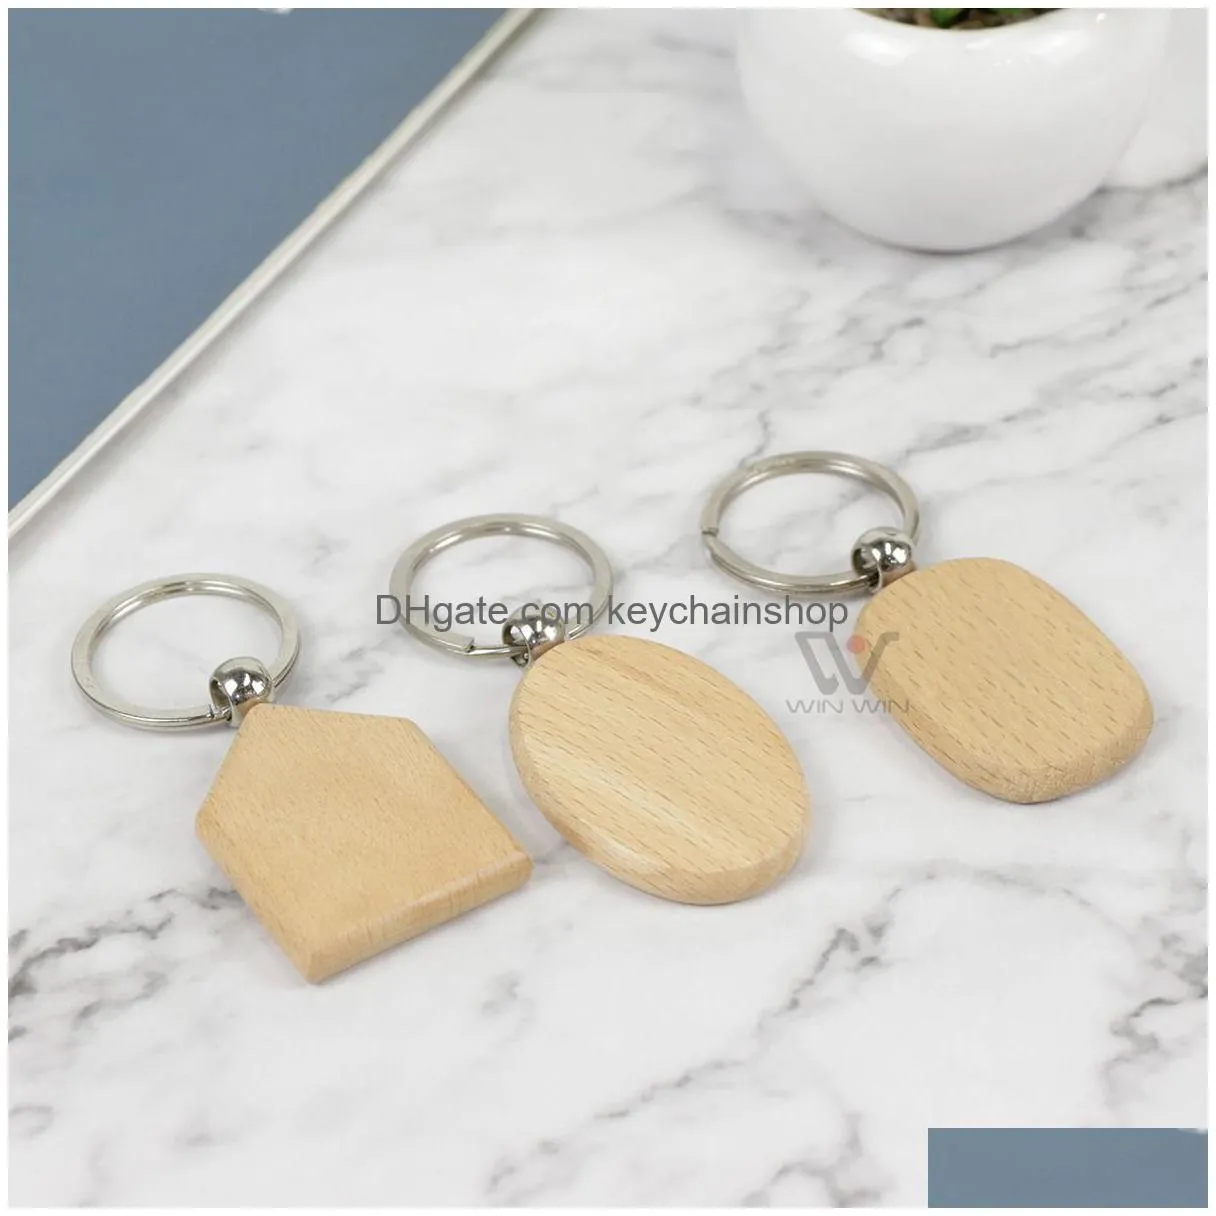 Blank Round Rec Wooden Key Chain Diy Pendant Wood Keychain Keyring Tags For Birthday Christmas New Year Gifts Fy5473 Tt1110 Drop Deliv Dh6Hc